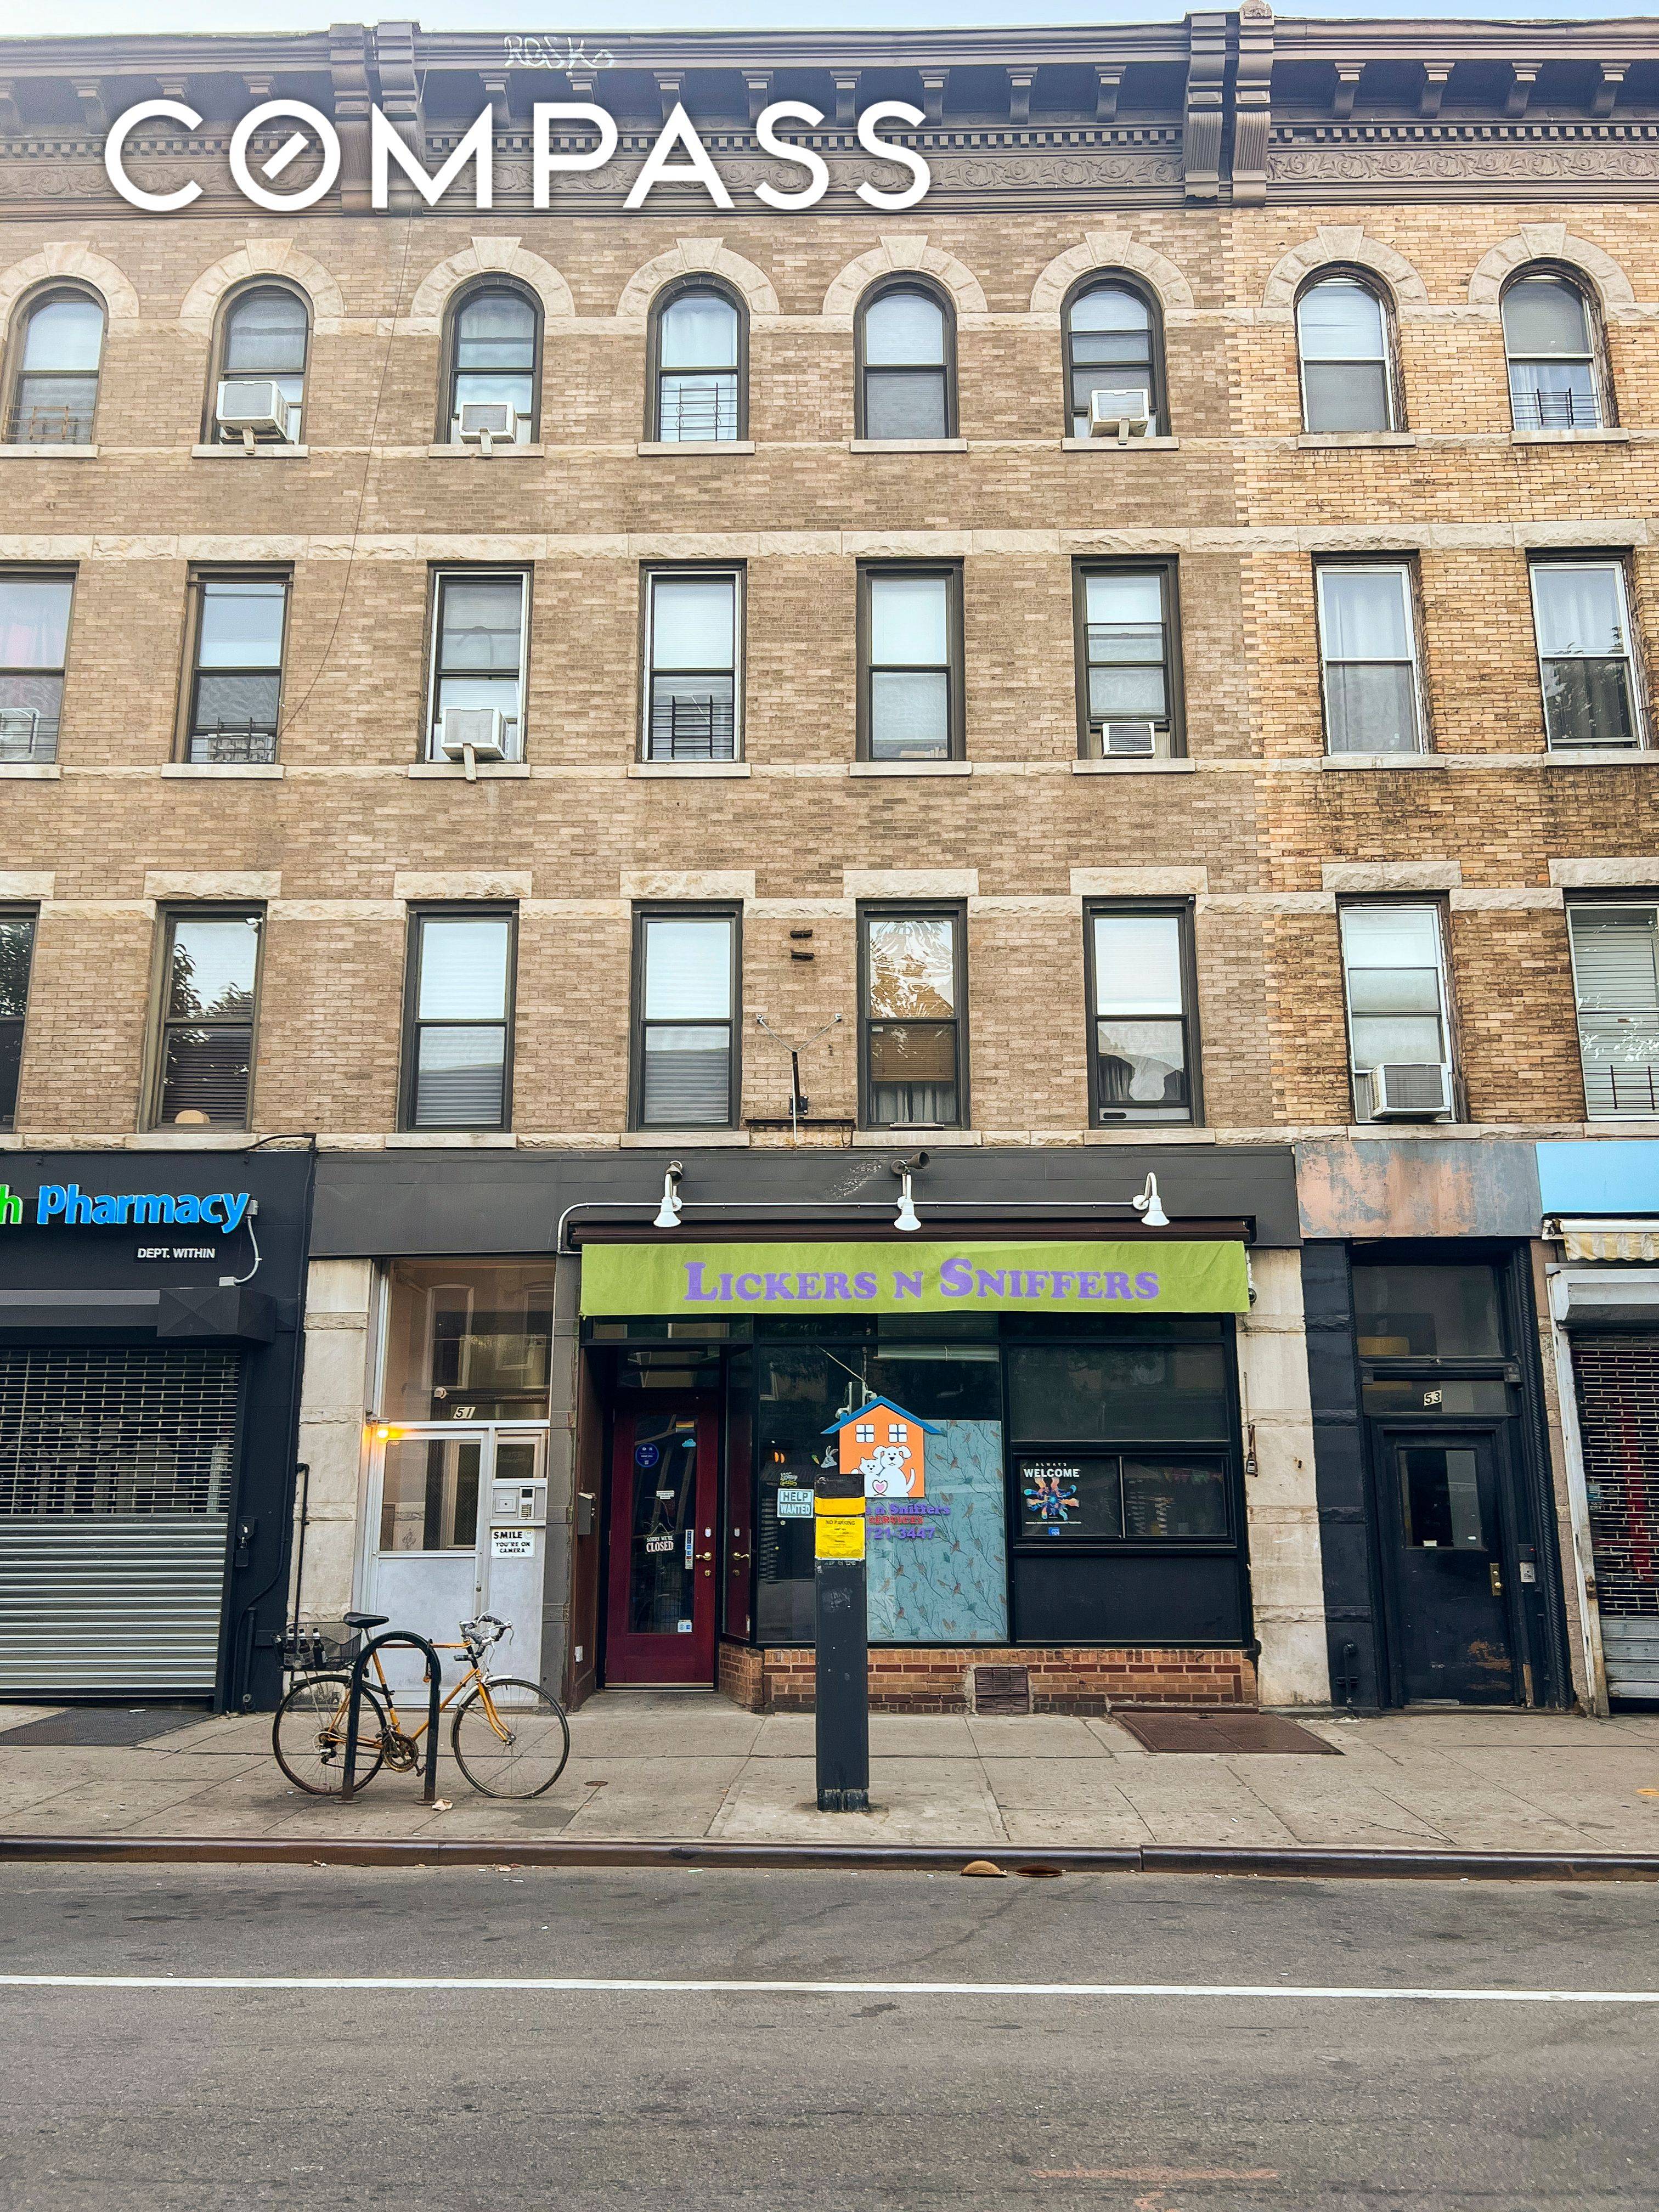 Great opportunity with this mixed use building in prime North Park Slope neighborhood.